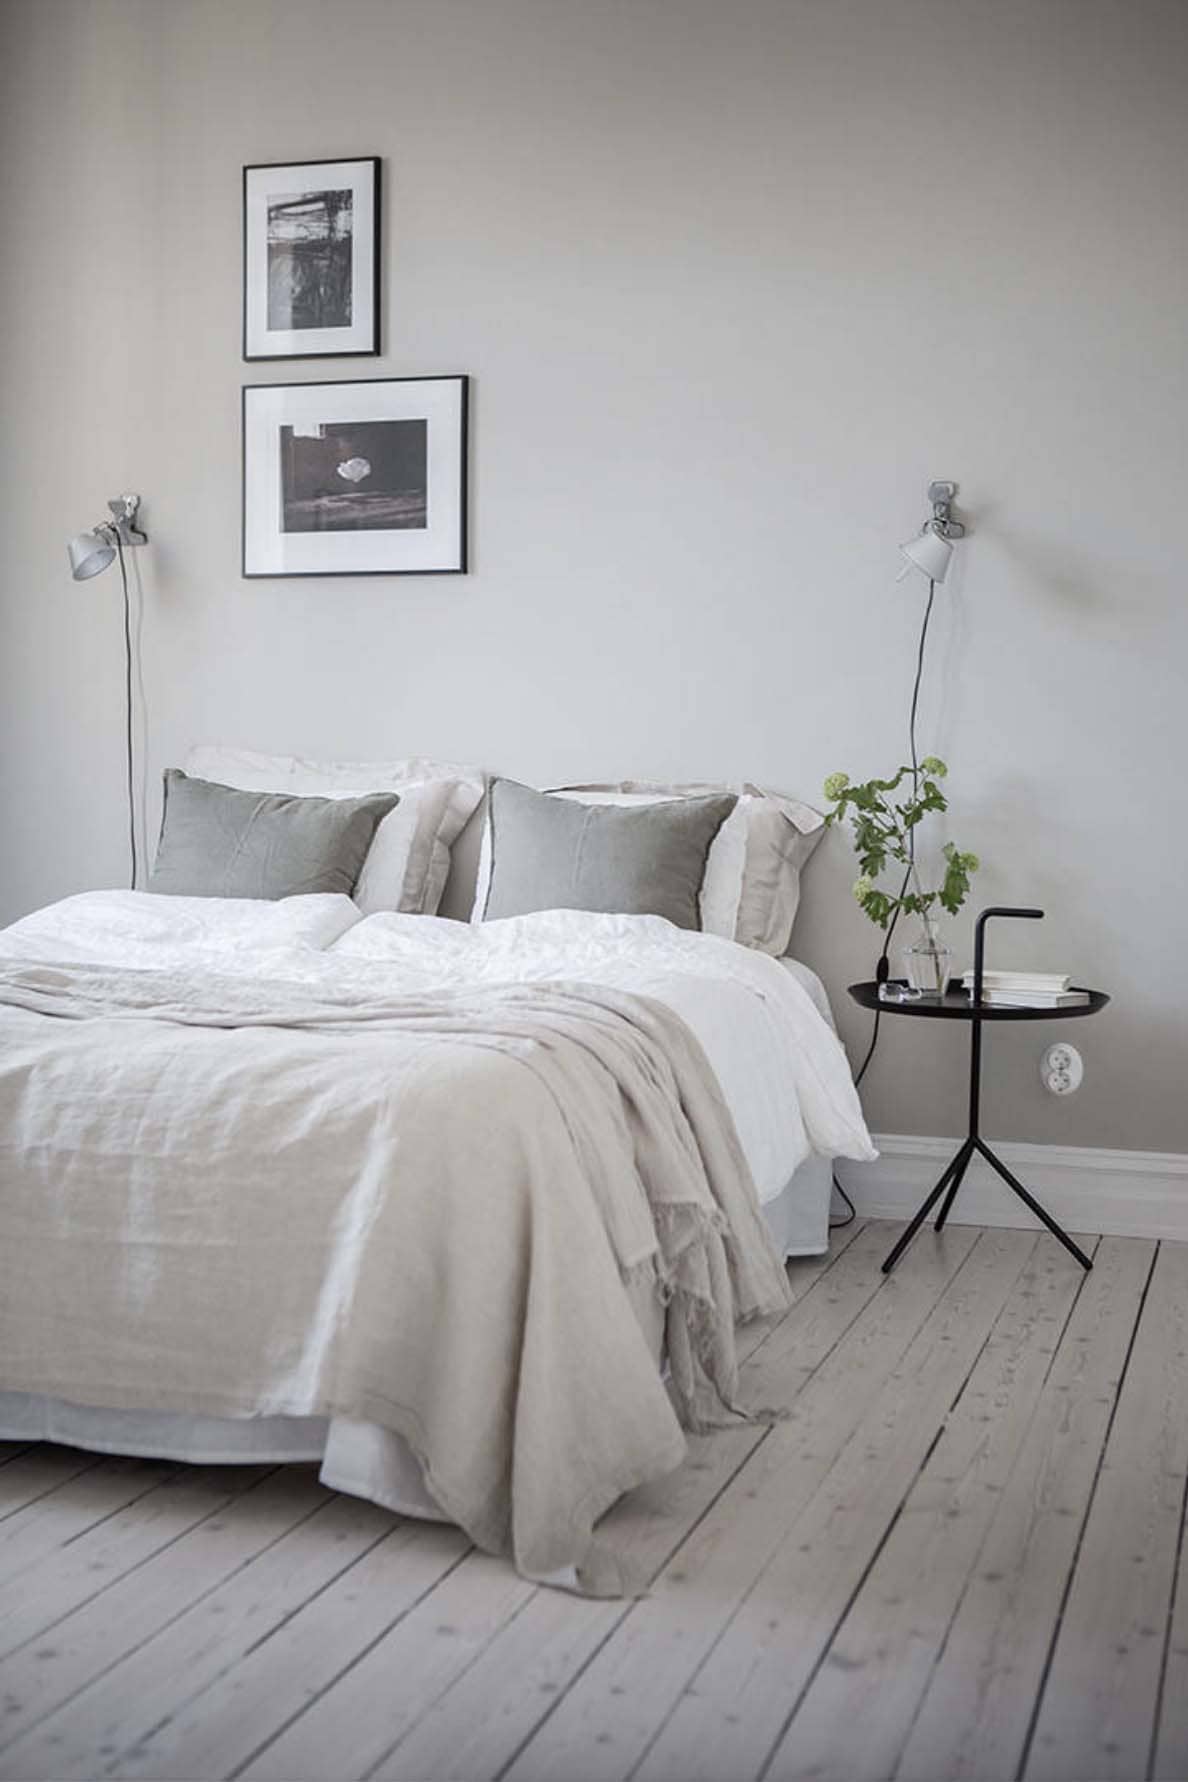 Scandinavian style bedroom with a neutral color palette